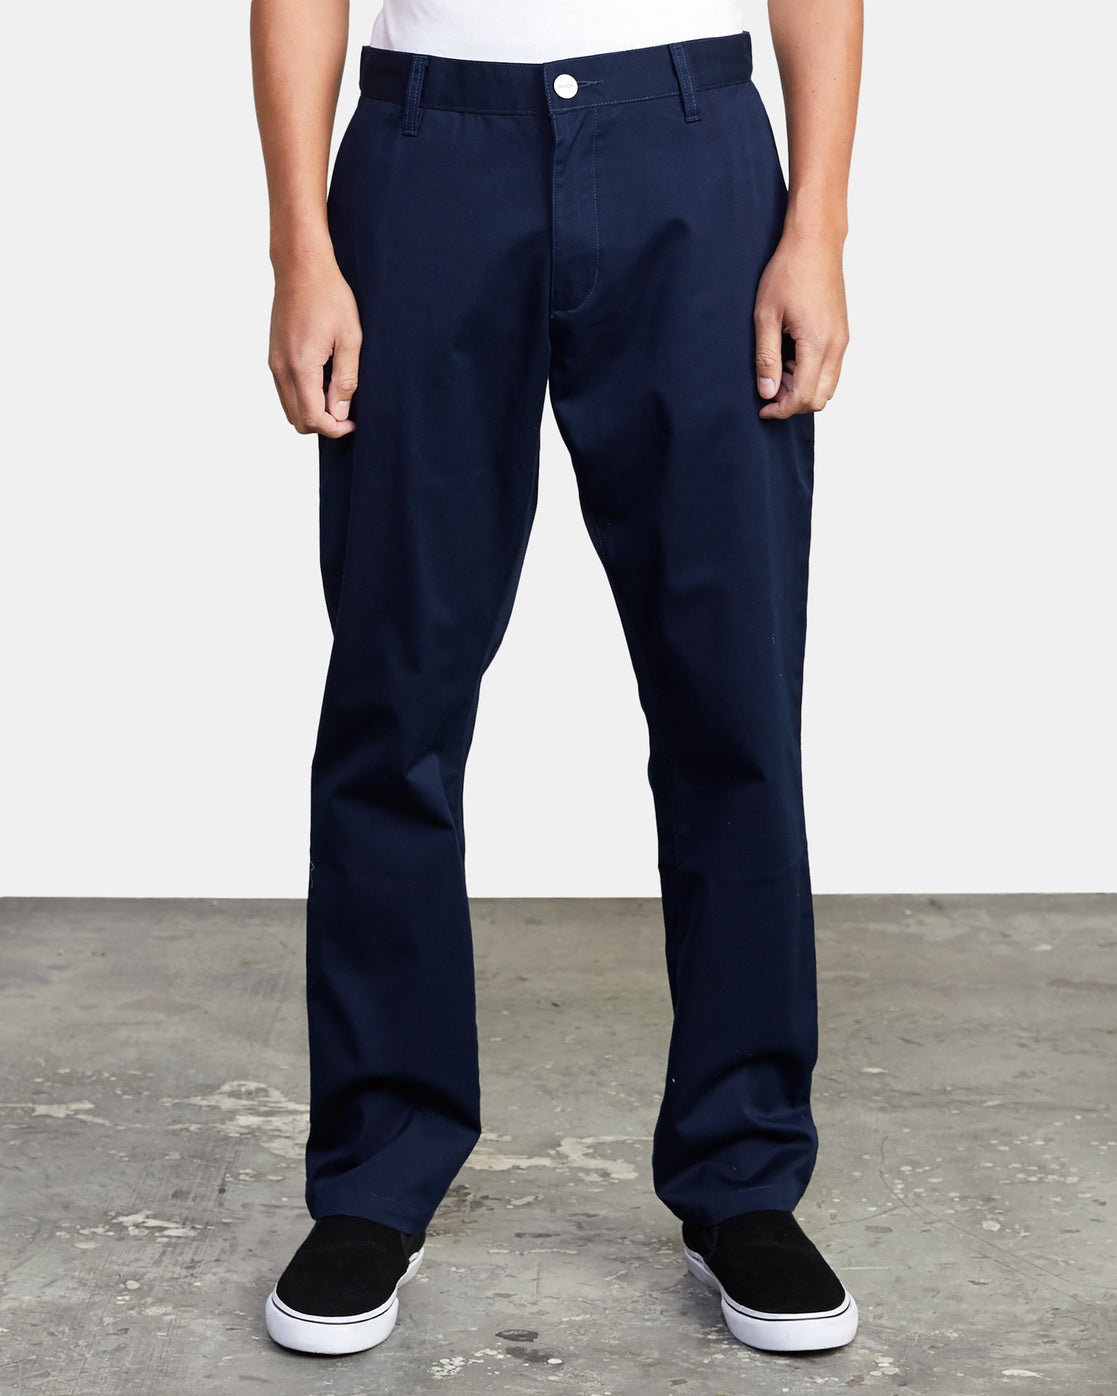 RVCA The Weekend Stretch Chino Pant